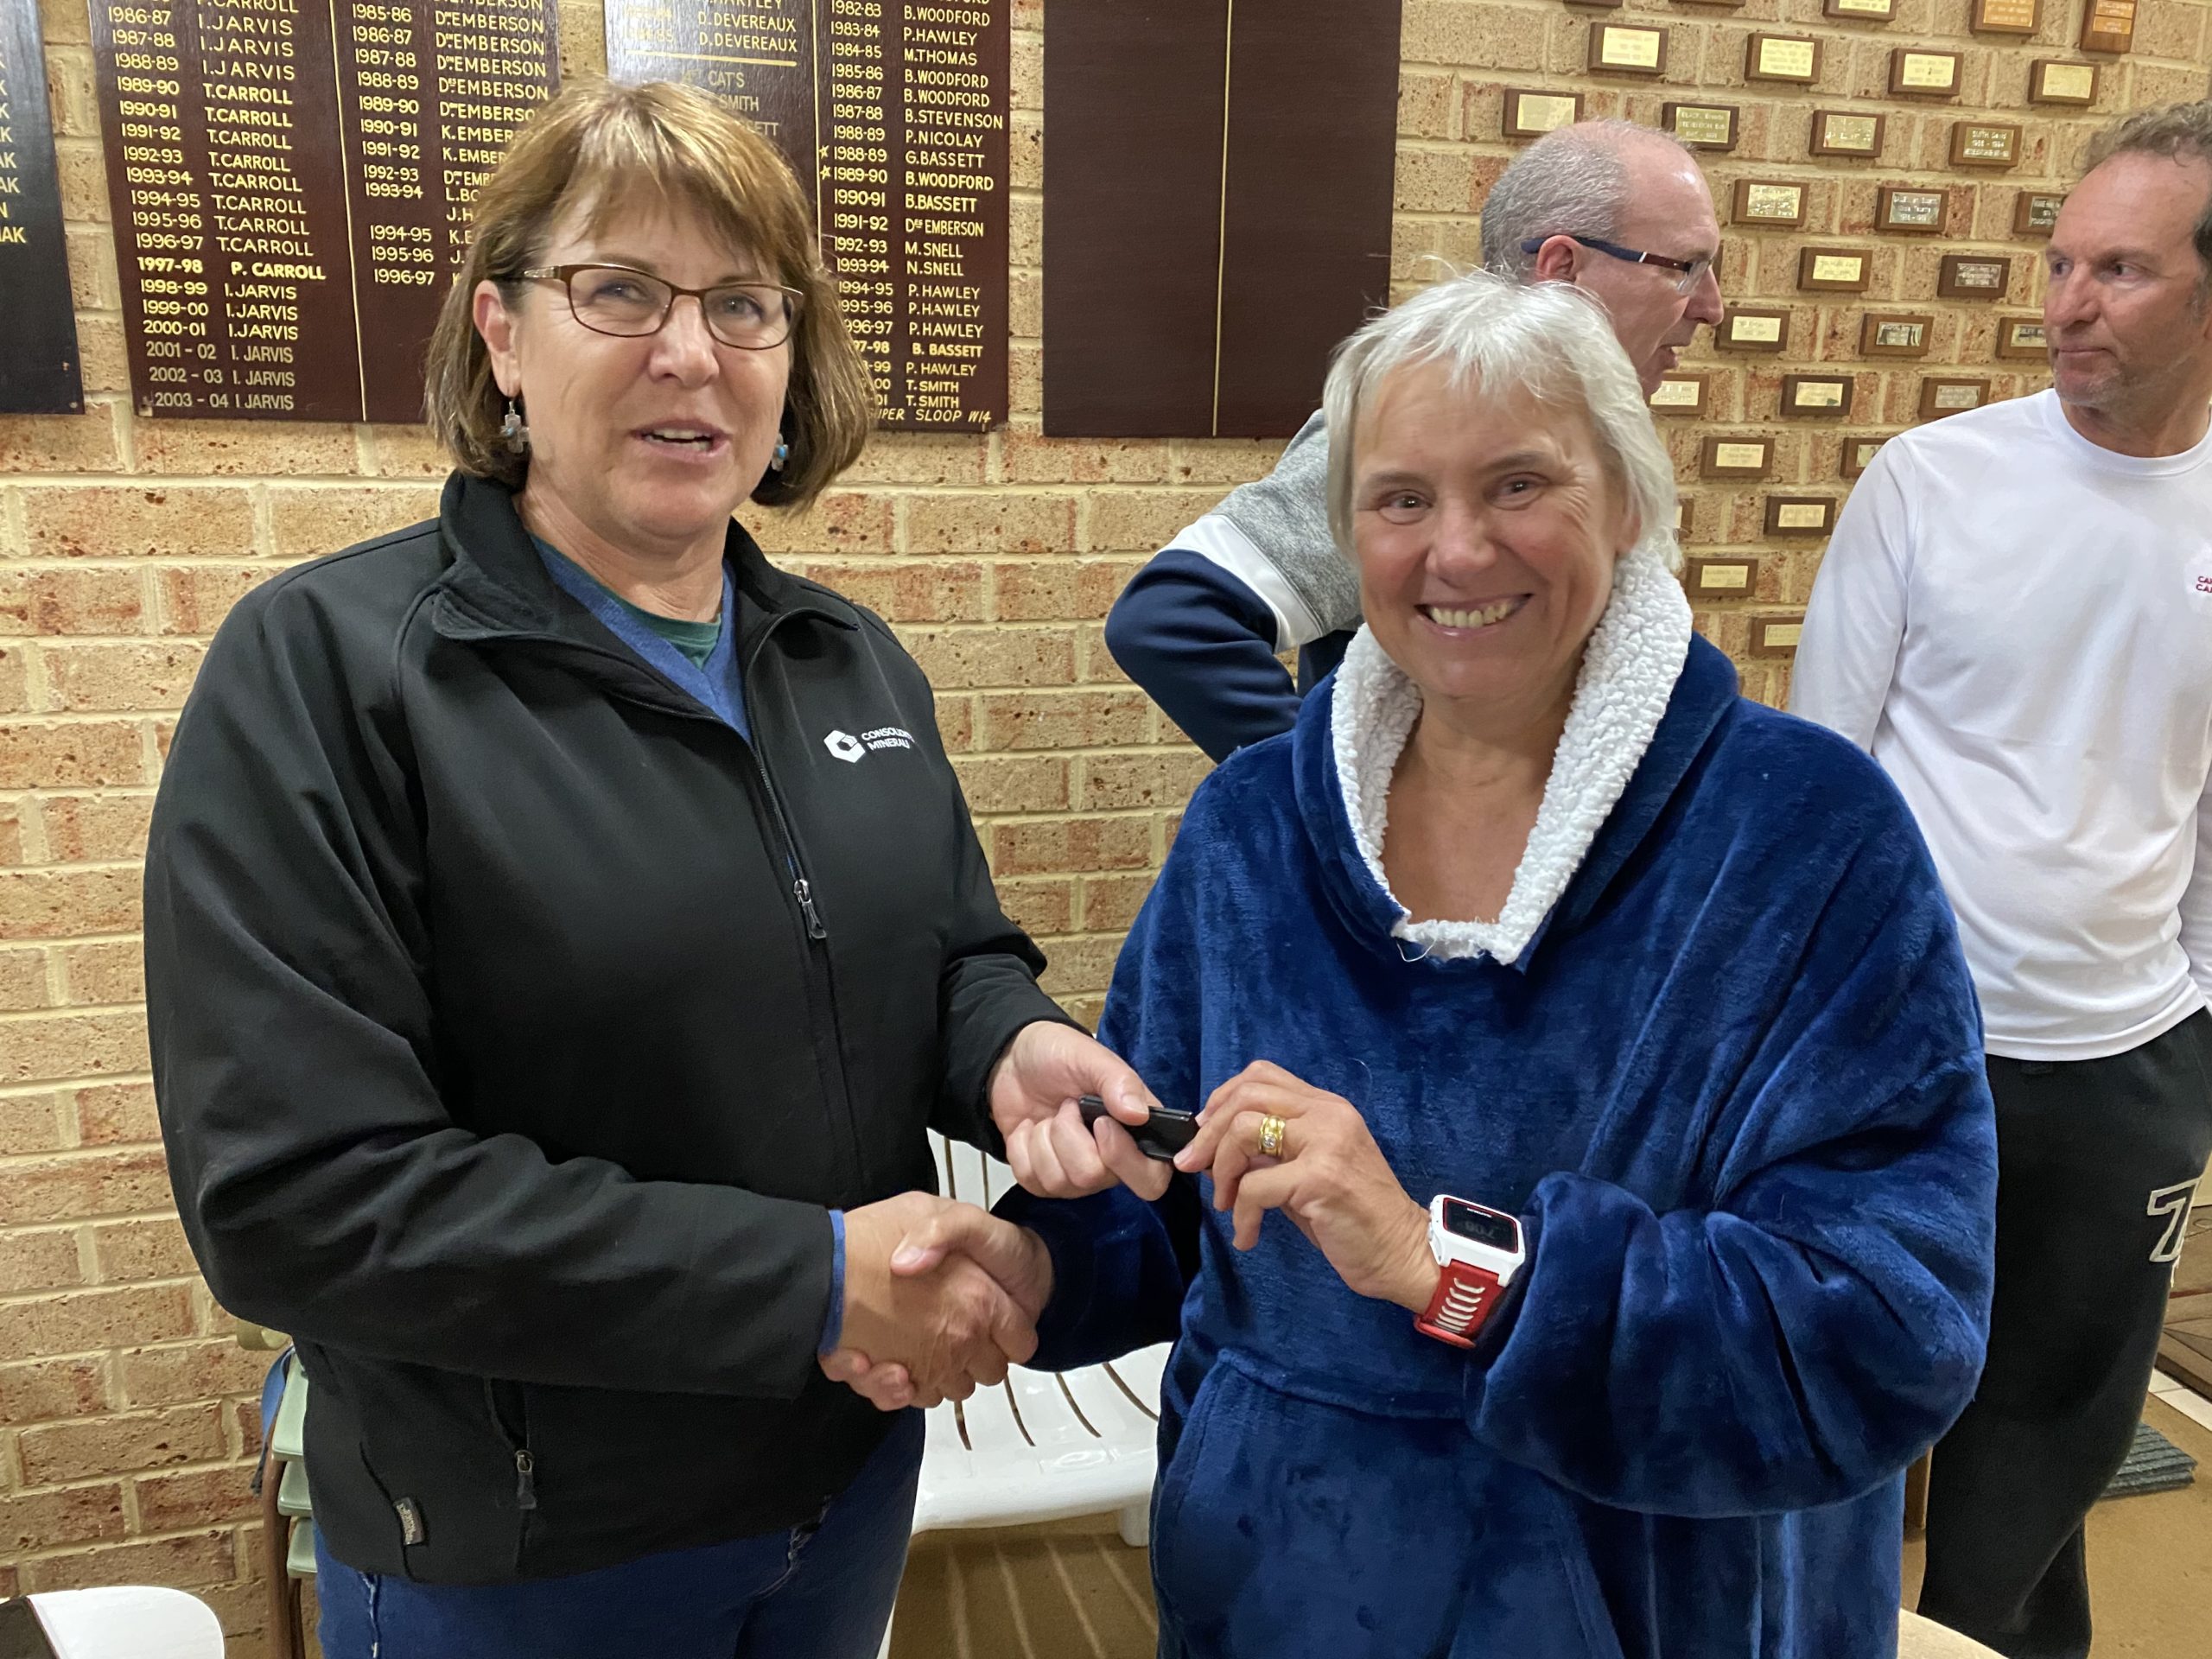 Tuesday 28th July 2020 : Tonight’s photos shows club Treasurer Simone Burge presenting Eve McNicol with a Boat number holder.